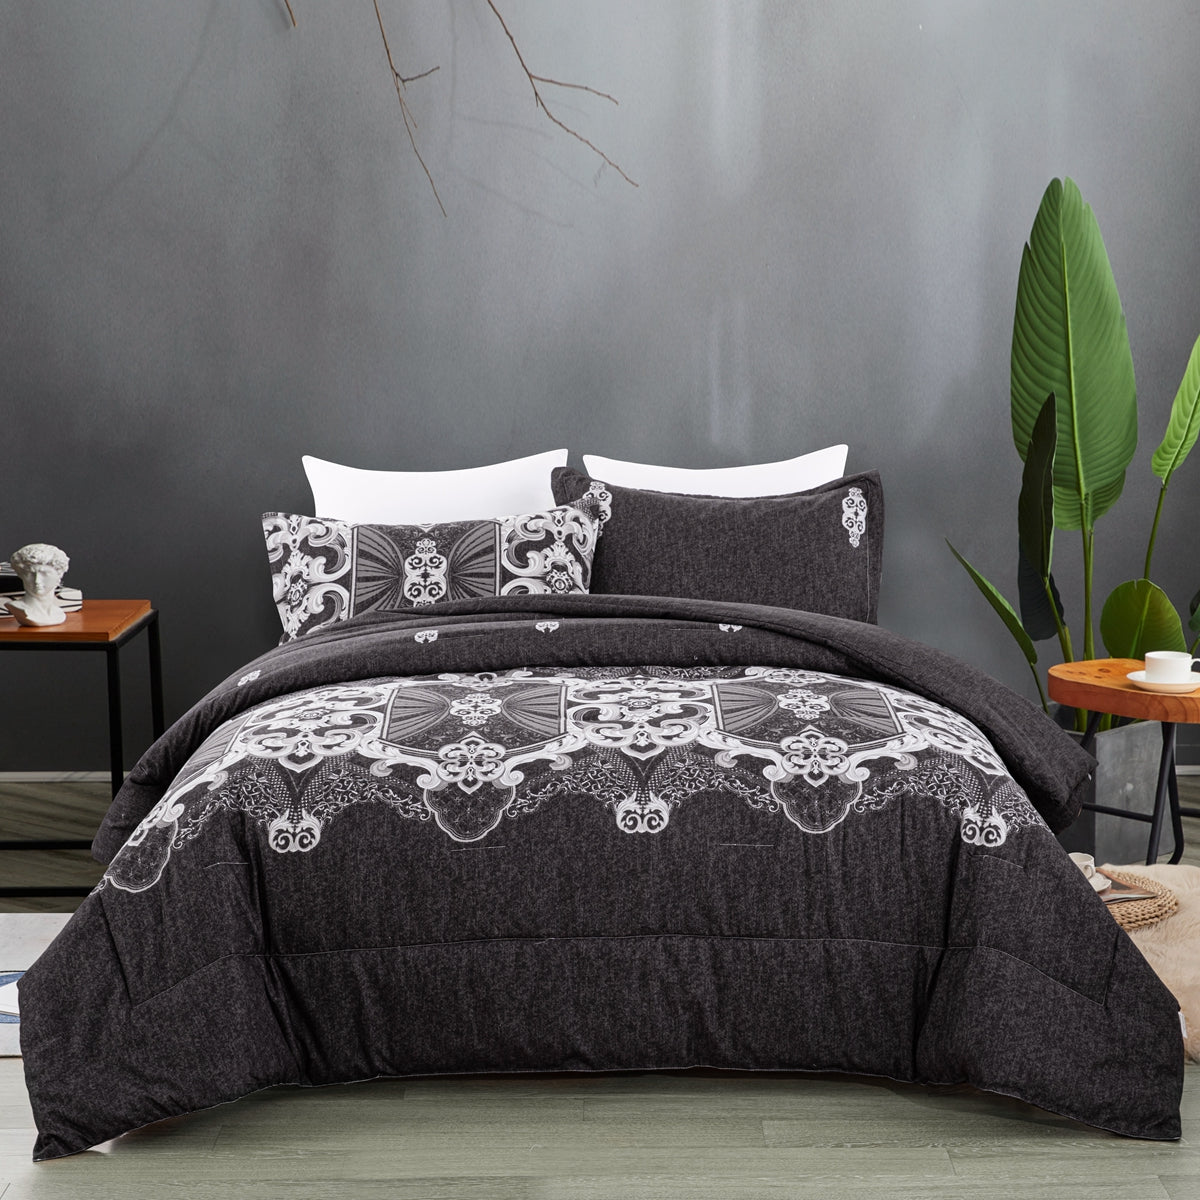 WONGS BEDDING Black Style Comforter Set with 2 Pillow Cases